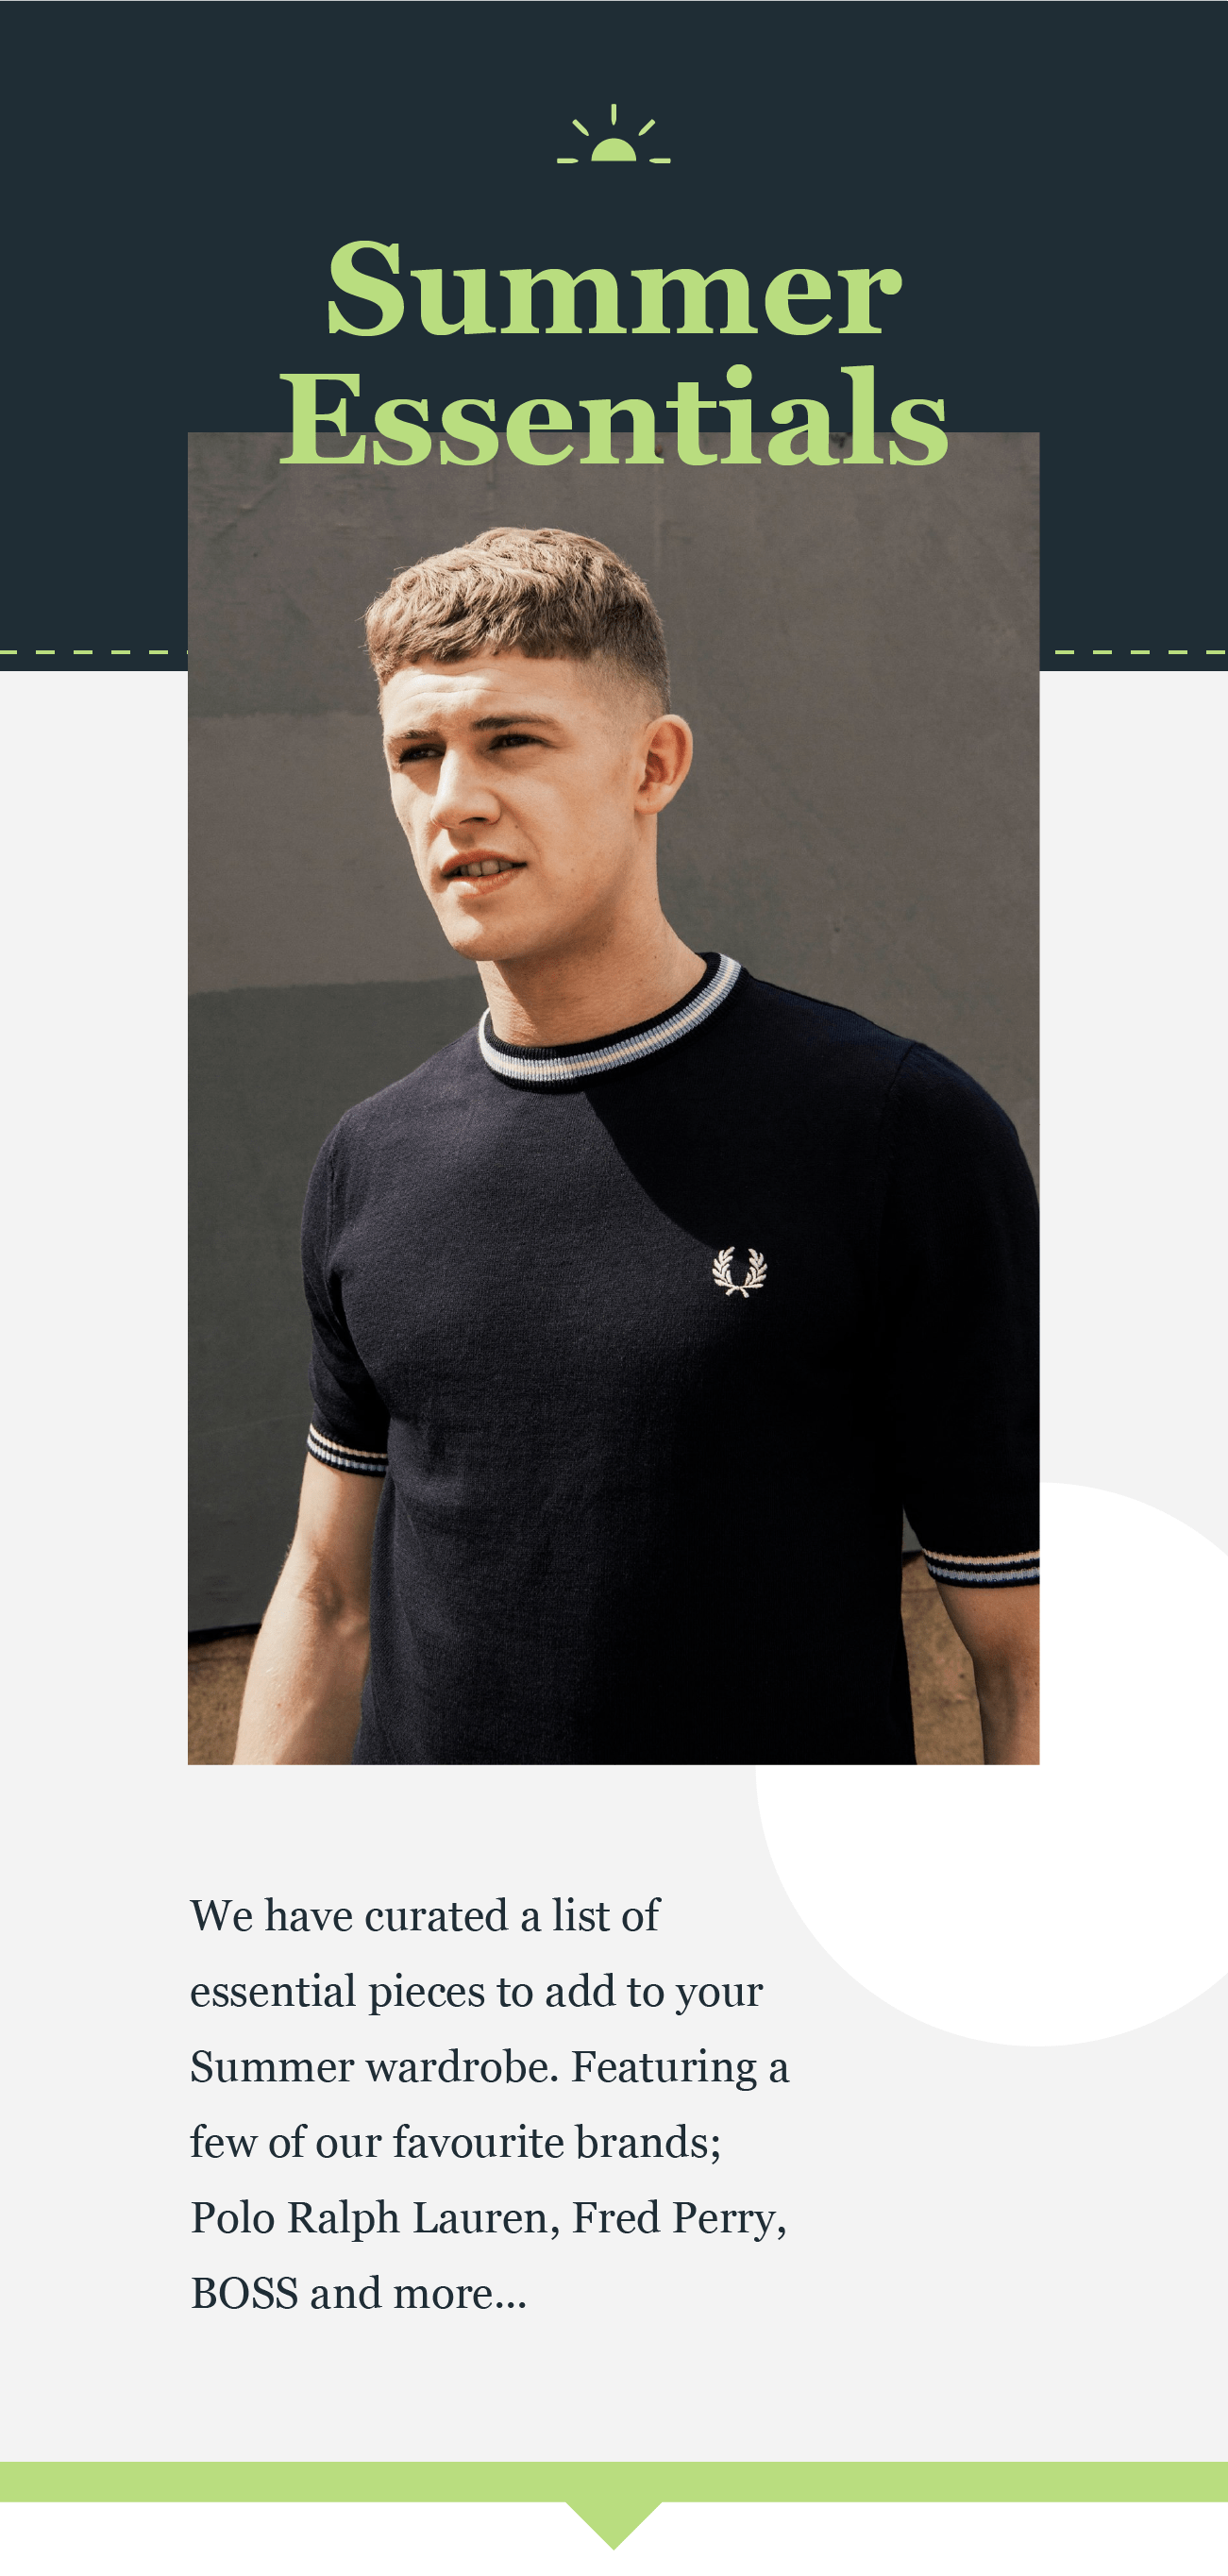 Summer
Essentials

We have curated a list of
essential pieces to add to your
Summer wardrobe. Featuring
a few of our favourite brands;
Polo Ralph Lauren, Fred Perry,
BOSS and more...

